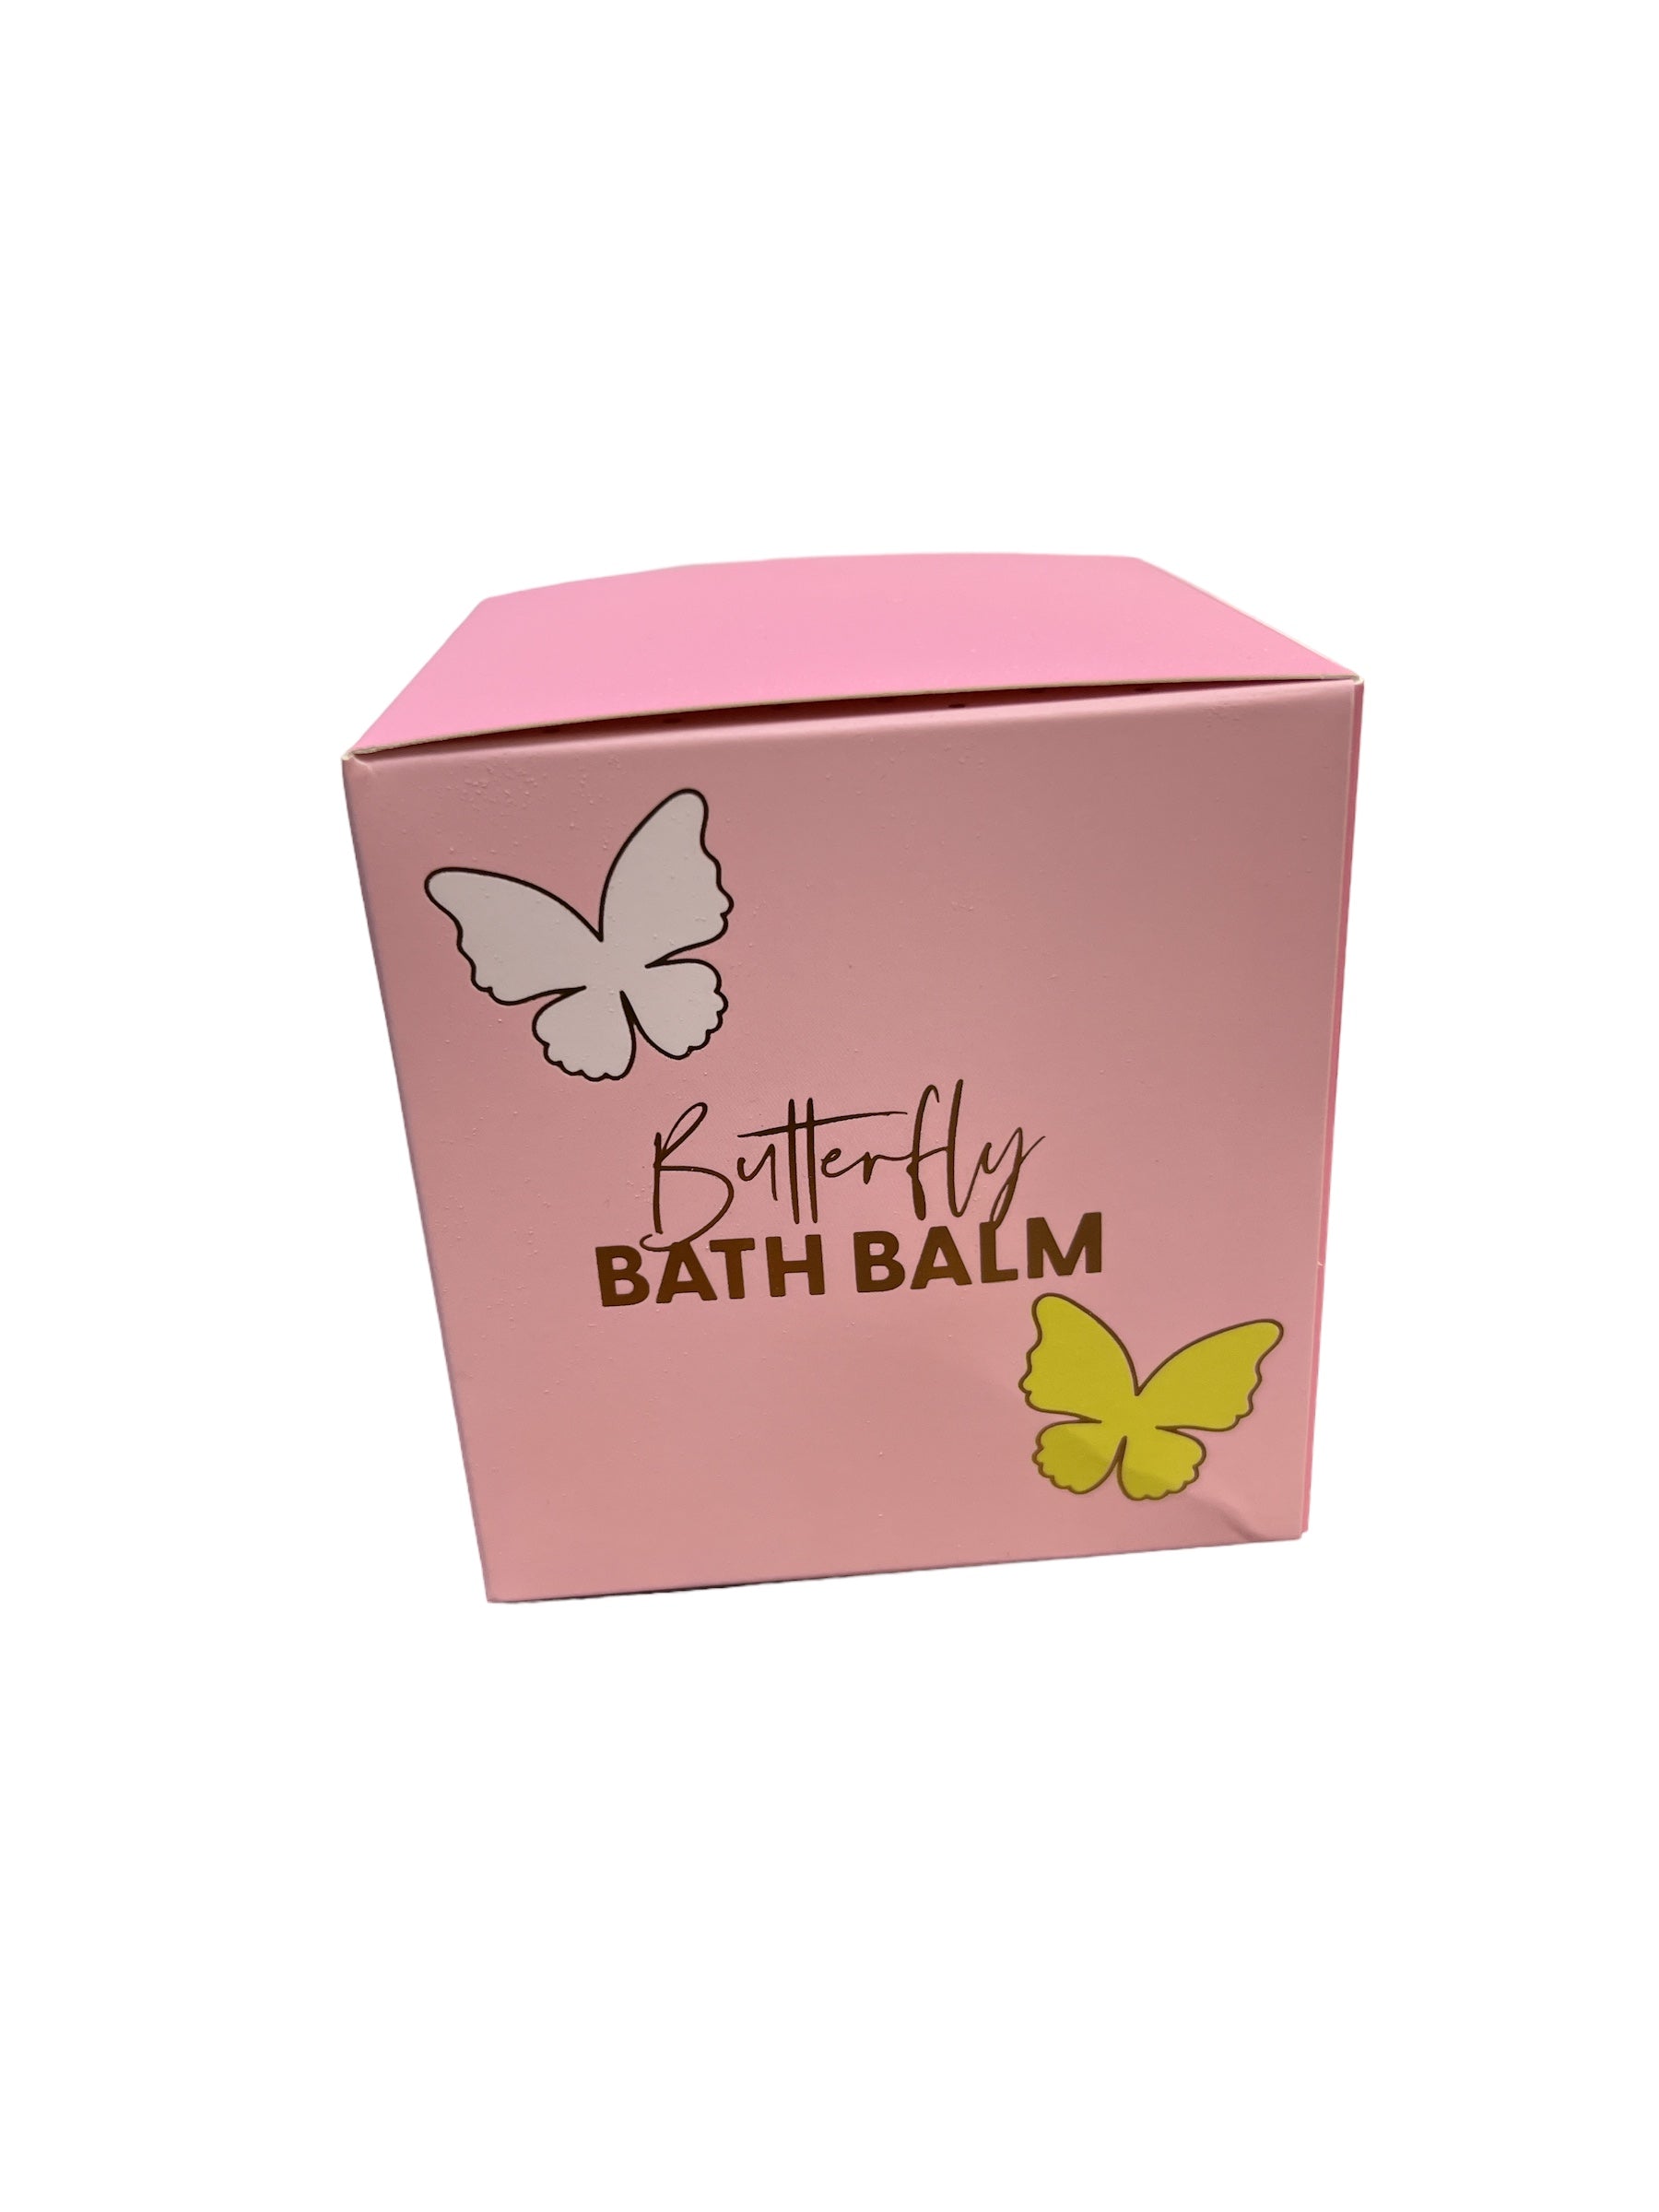 ButterFly Boxed Bath Balm-510 General Gifts-Simply Stylish Boutique-Simply Stylish Boutique | Women’s & Kid’s Fashion | Paducah, KY